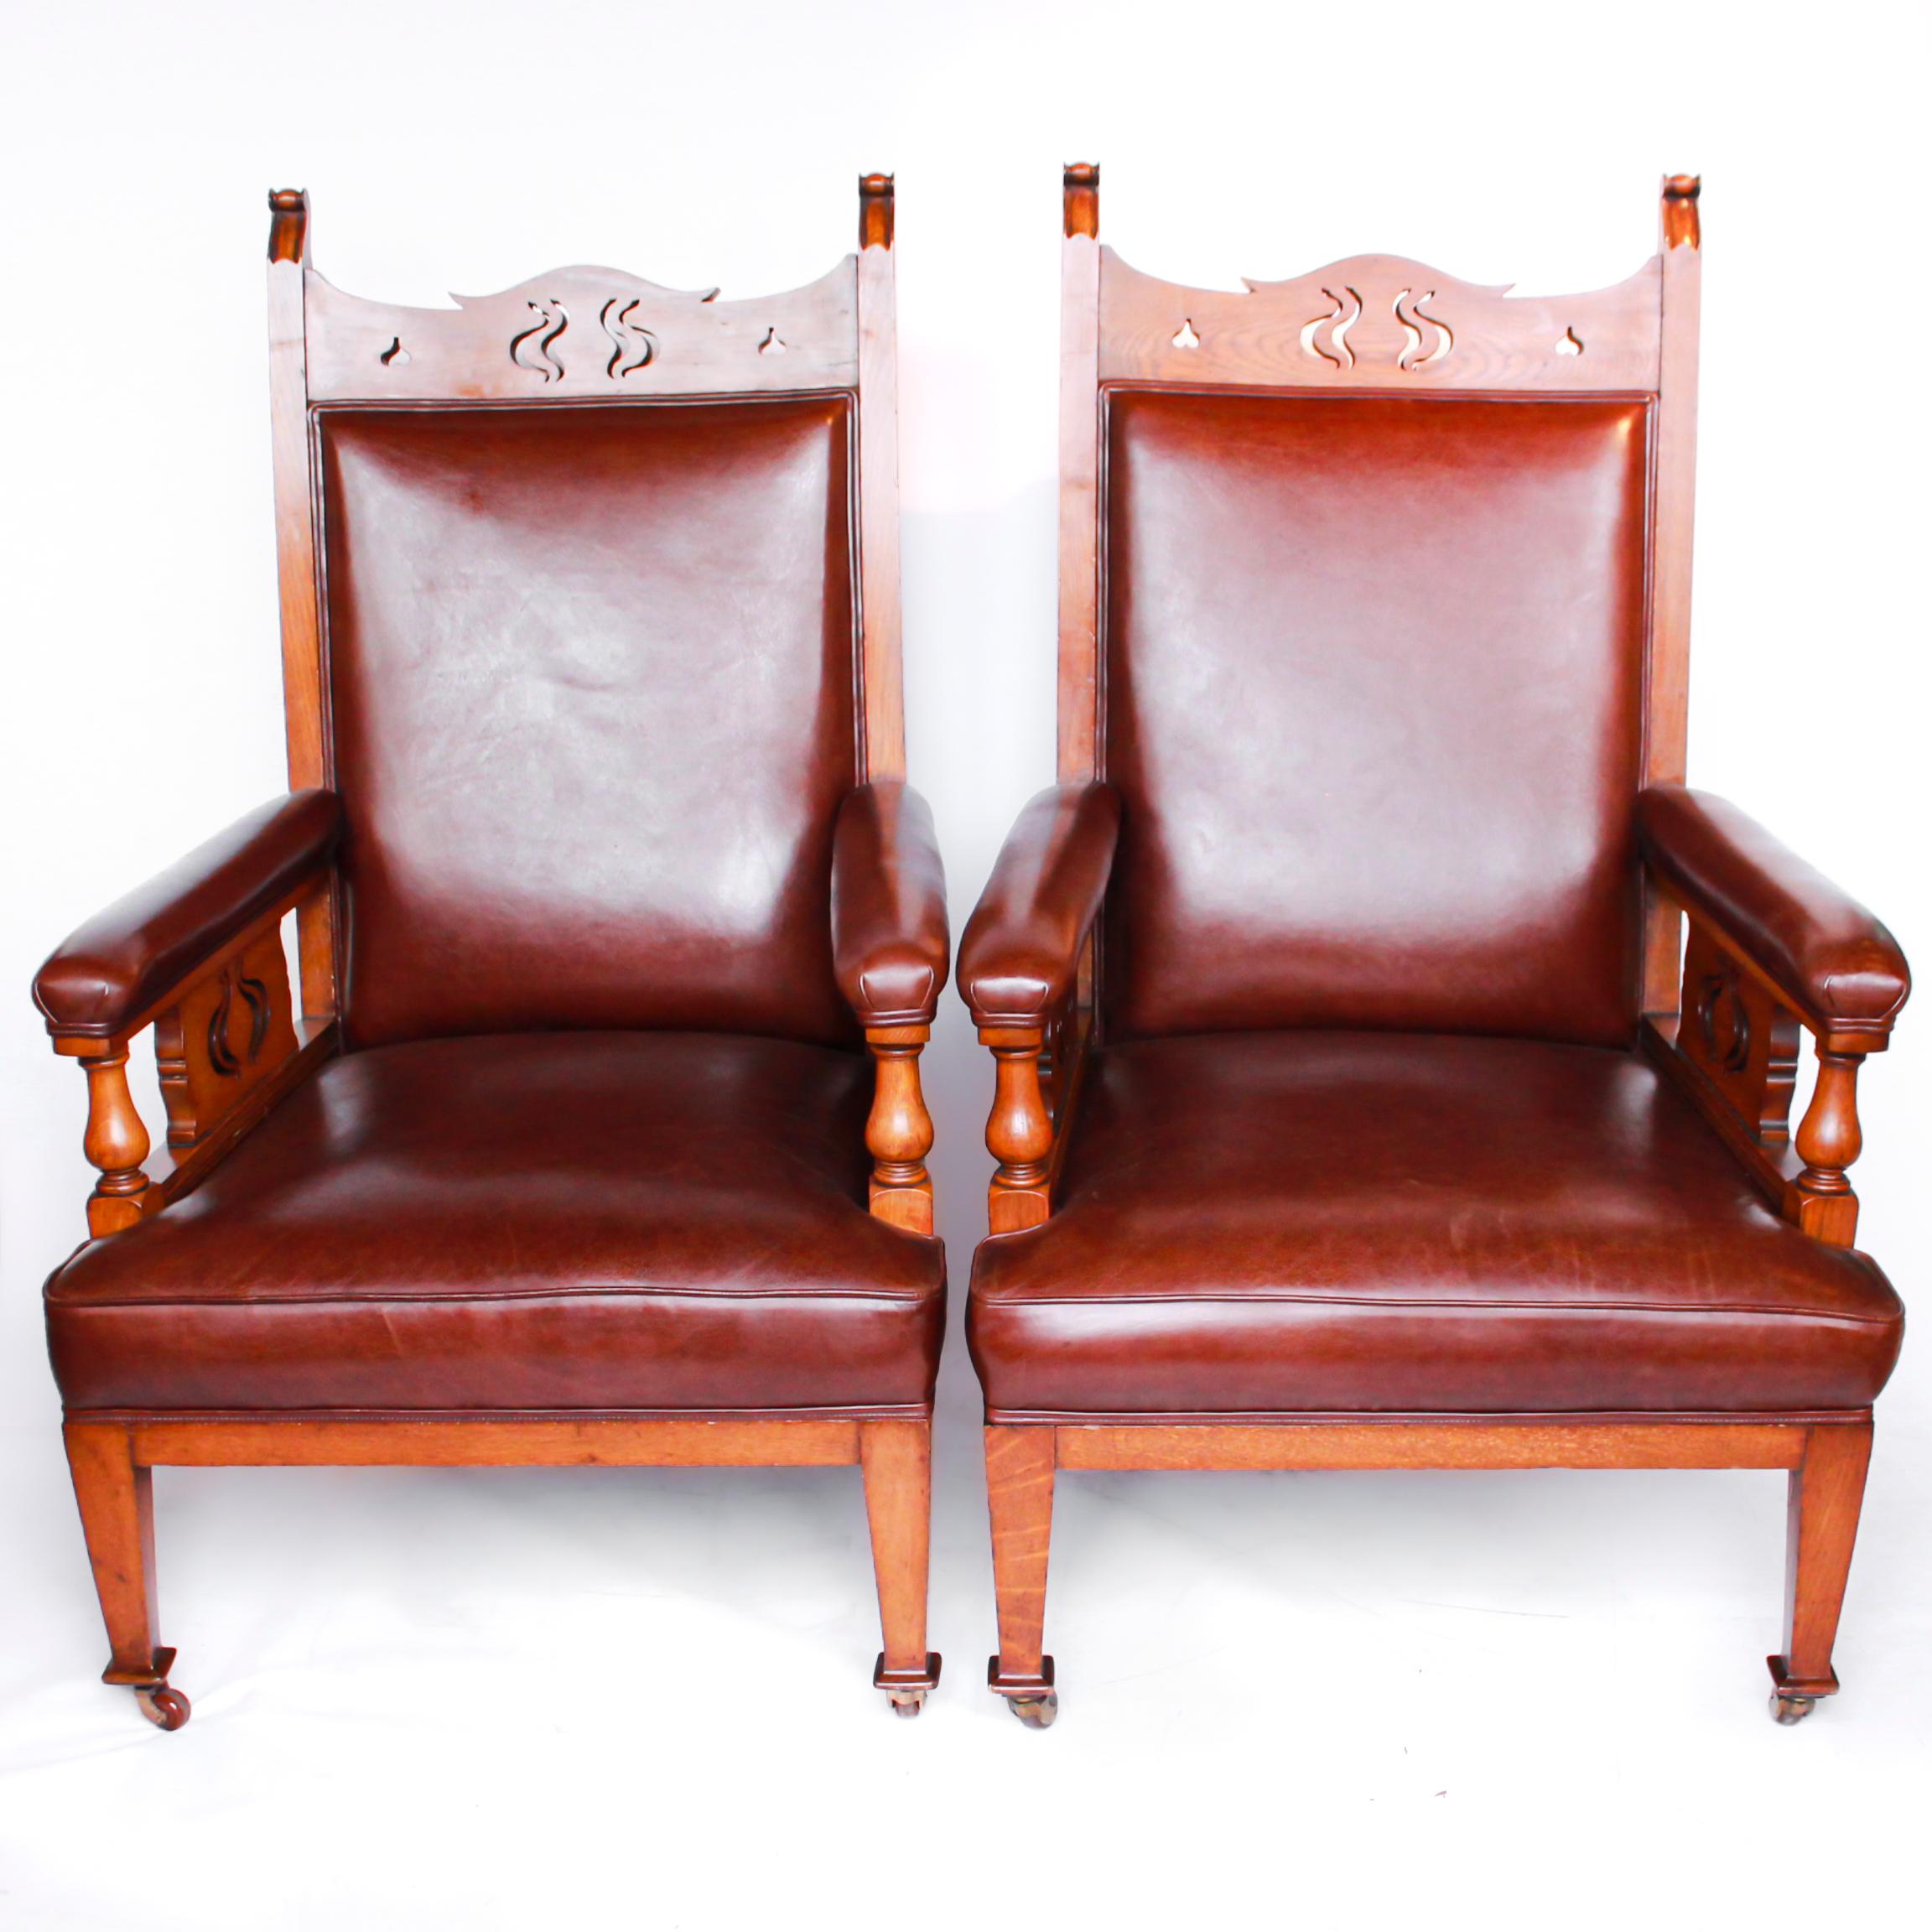 A pair of Arts & Crafts library chairs attributed to Liberty & Co. Solid oak frame. Carved detail to top and sides. Upholstered in Chestnut leather. 

Dimensions: H 103cm, W 56cm, seat D 66cm

Origin: English

Date: circa 1910

Item no: 1712191.